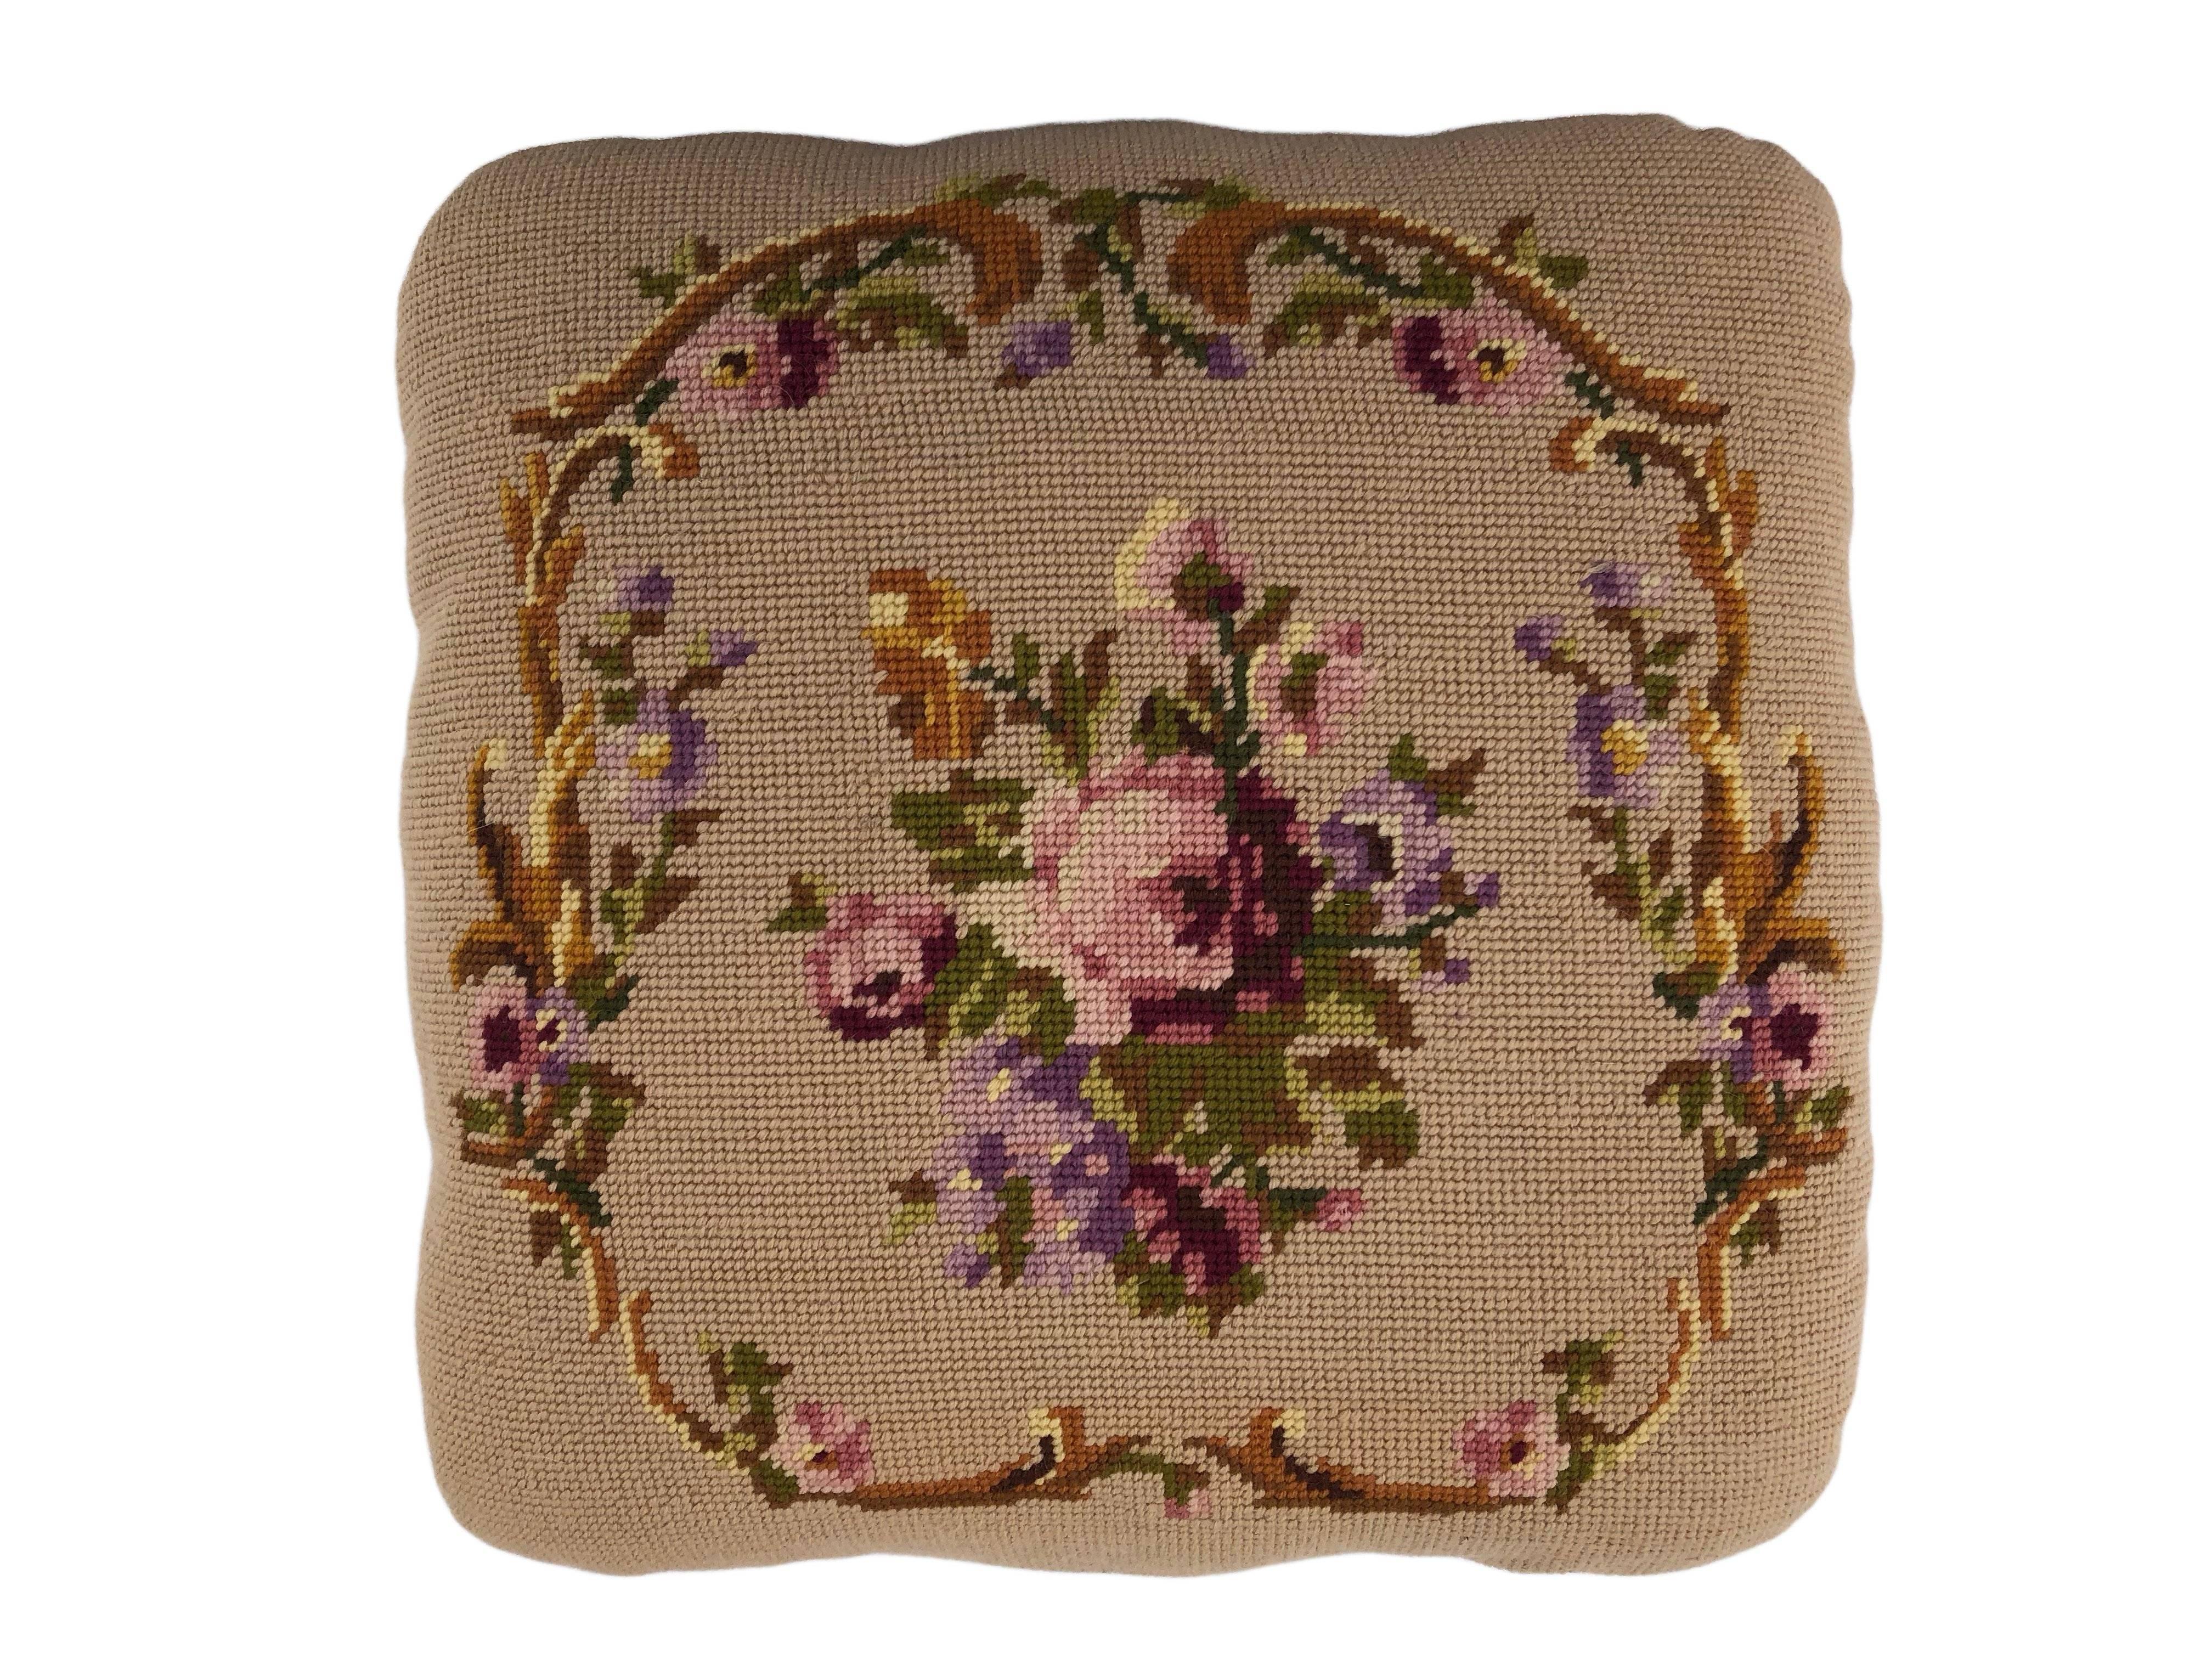 This is a lovely French wood foot stool with a tan/cream background and a beautiful floral embroidery in the centre which is surrounded by a circle of embroidered flowers with a scroll design. The embroidery has beautiful purple, pink, cream, tan,